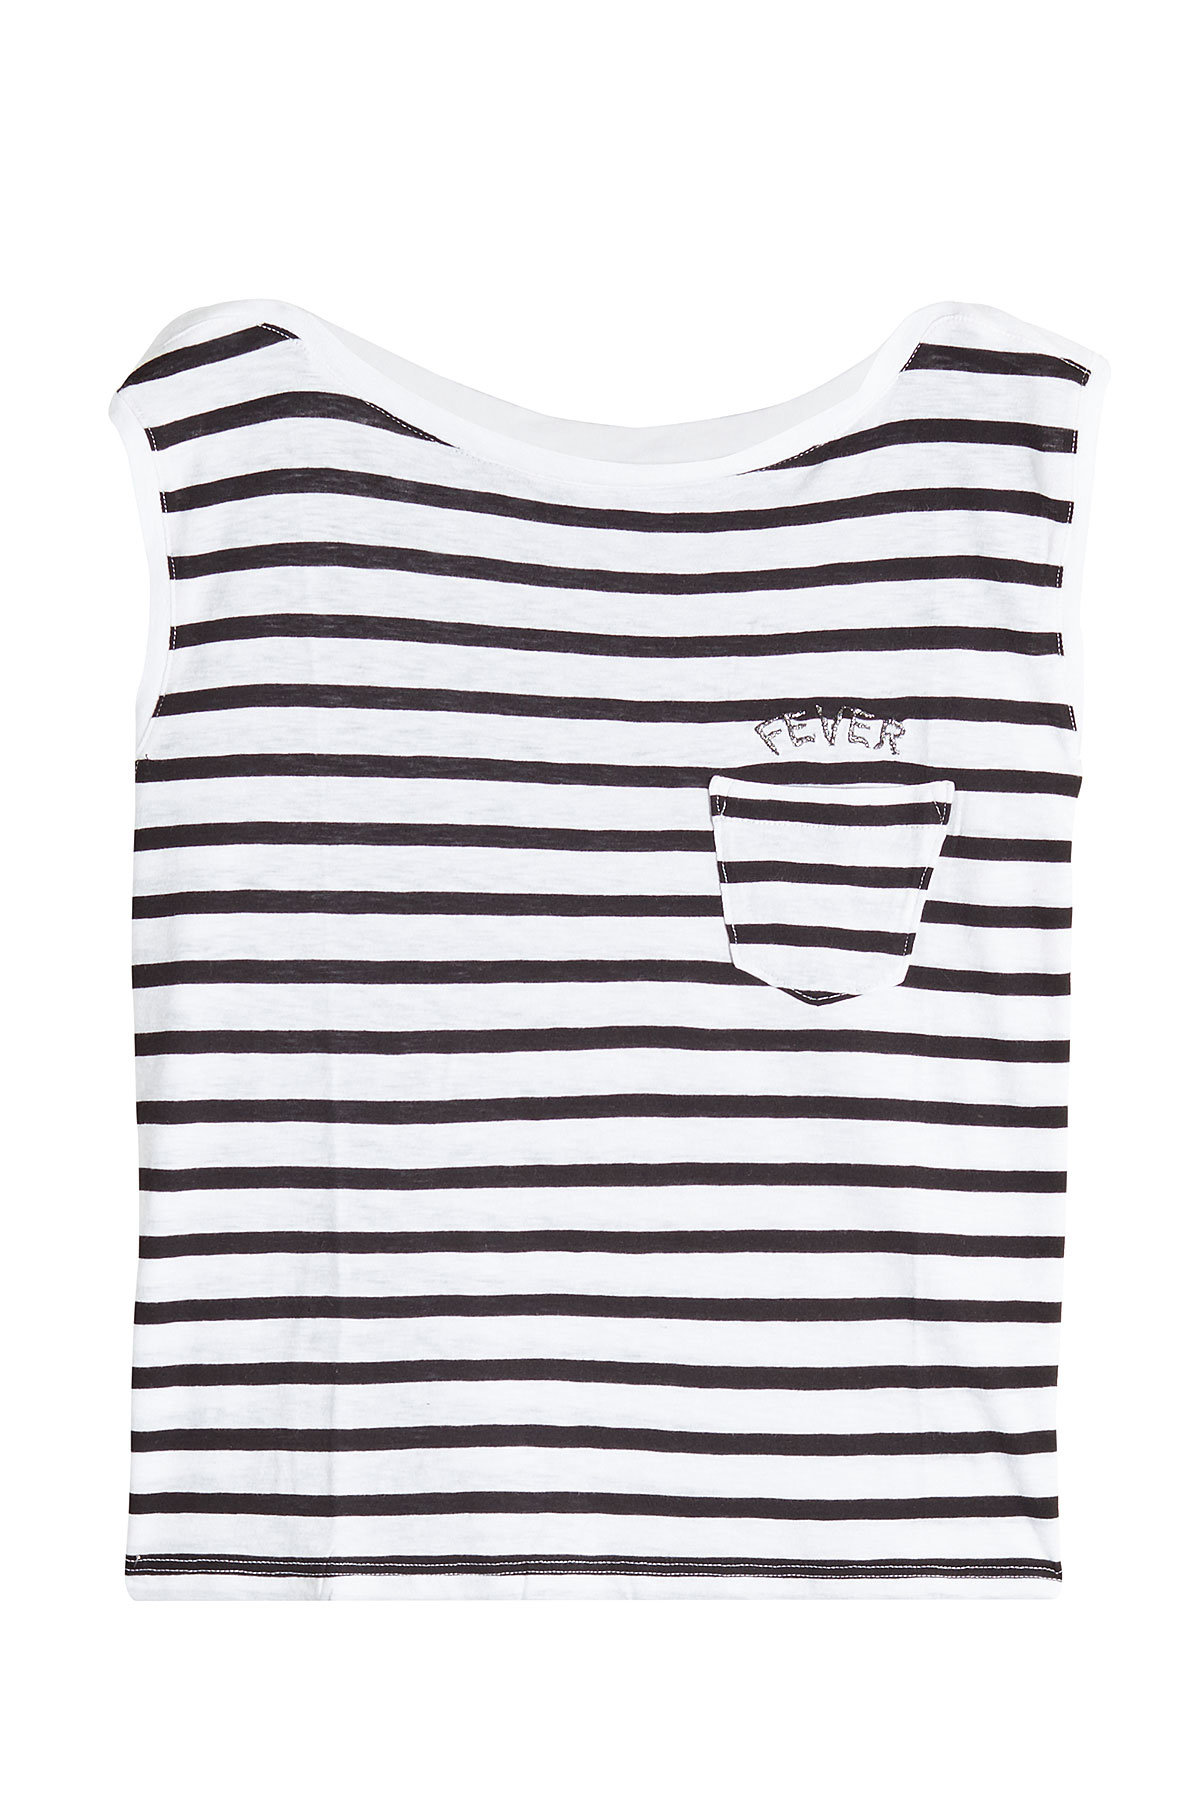 Frida Striped Tank with Embroidery by Zadig & Voltaire